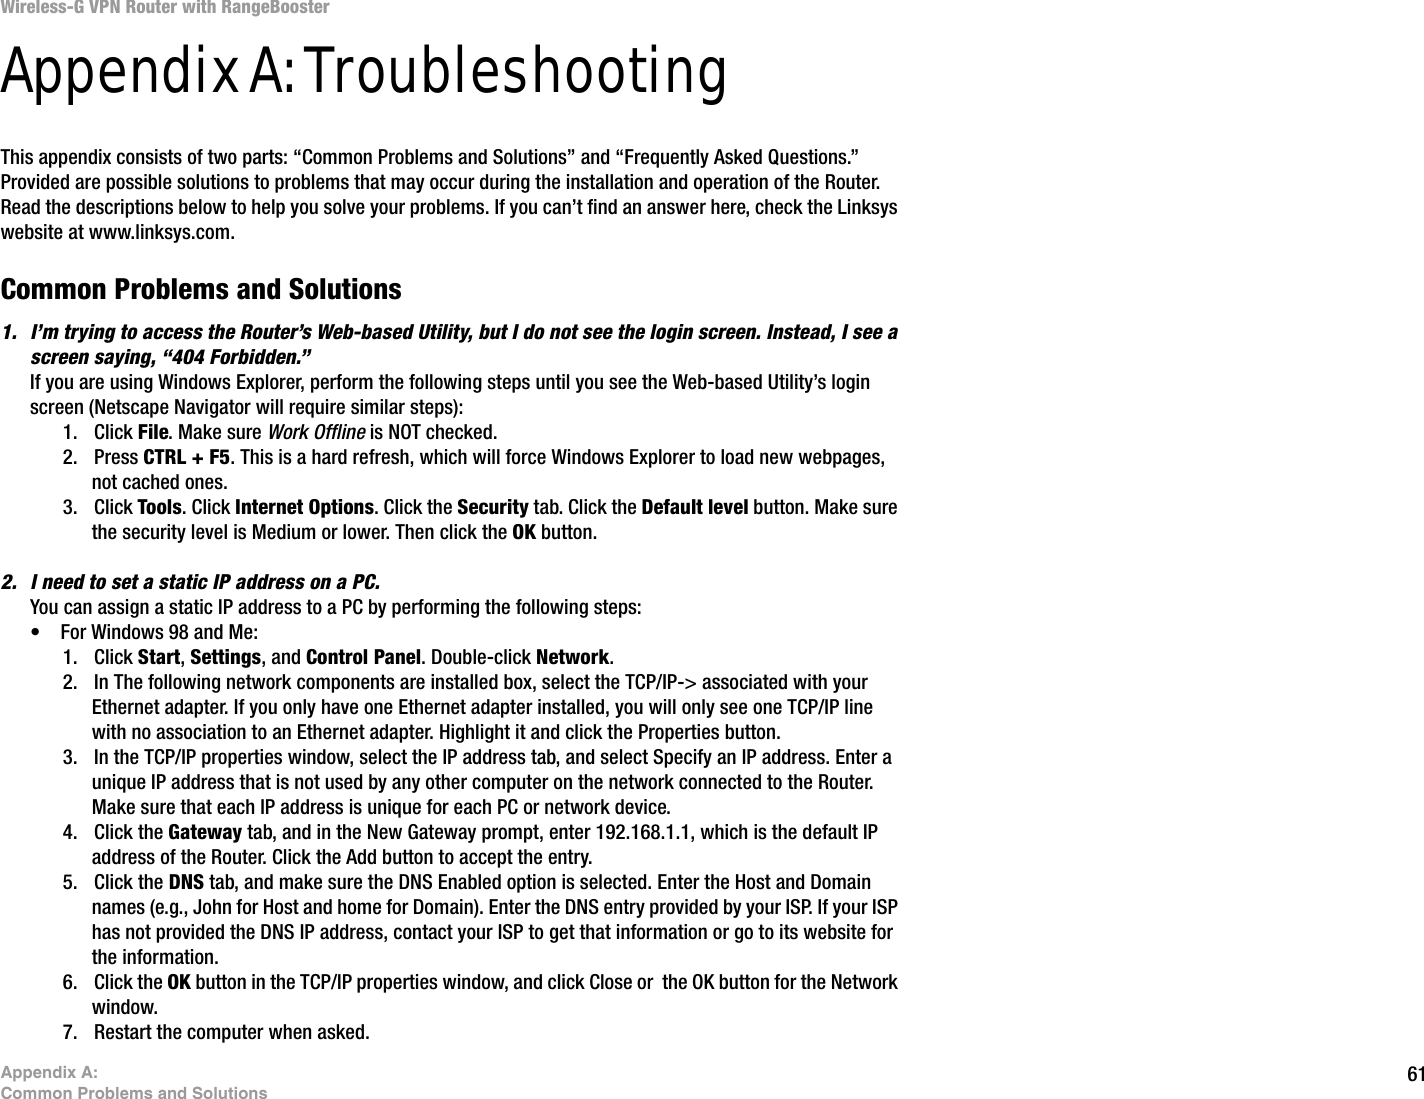 61Appendix A: Common Problems and SolutionsWireless-G VPN Router with RangeBoosterAppendix A: TroubleshootingThis appendix consists of two parts: “Common Problems and Solutions” and “Frequently Asked Questions.” Provided are possible solutions to problems that may occur during the installation and operation of the Router. Read the descriptions below to help you solve your problems. If you can’t find an answer here, check the Linksys website at www.linksys.com.Common Problems and Solutions1. I’m trying to access the Router’s Web-based Utility, but I do not see the login screen. Instead, I see a screen saying, “404 Forbidden.”If you are using Windows Explorer, perform the following steps until you see the Web-based Utility’s login screen (Netscape Navigator will require similar steps):1. Click File. Make sure Work Offline is NOT checked.2. Press CTRL + F5. This is a hard refresh, which will force Windows Explorer to load new webpages, not cached ones.3. Click Tools. Click Internet Options. Click the Security tab. Click the Default level button. Make sure the security level is Medium or lower. Then click the OK button.2. I need to set a static IP address on a PC.You can assign a static IP address to a PC by performing the following steps:• For Windows 98 and Me:1. Click Start, Settings, and Control Panel. Double-click Network.2. In The following network components are installed box, select the TCP/IP-&gt; associated with your Ethernet adapter. If you only have one Ethernet adapter installed, you will only see one TCP/IP line with no association to an Ethernet adapter. Highlight it and click the Properties button.3. In the TCP/IP properties window, select the IP address tab, and select Specify an IP address. Enter a unique IP address that is not used by any other computer on the network connected to the Router. Make sure that each IP address is unique for each PC or network device.4. Click the Gateway tab, and in the New Gateway prompt, enter 192.168.1.1, which is the default IP address of the Router. Click the Add button to accept the entry.5. Click the DNS tab, and make sure the DNS Enabled option is selected. Enter the Host and Domain names (e.g., John for Host and home for Domain). Enter the DNS entry provided by your ISP. If your ISP has not provided the DNS IP address, contact your ISP to get that information or go to its website for the information.6. Click the OK button in the TCP/IP properties window, and click Close or  the OK button for the Network window.7. Restart the computer when asked.